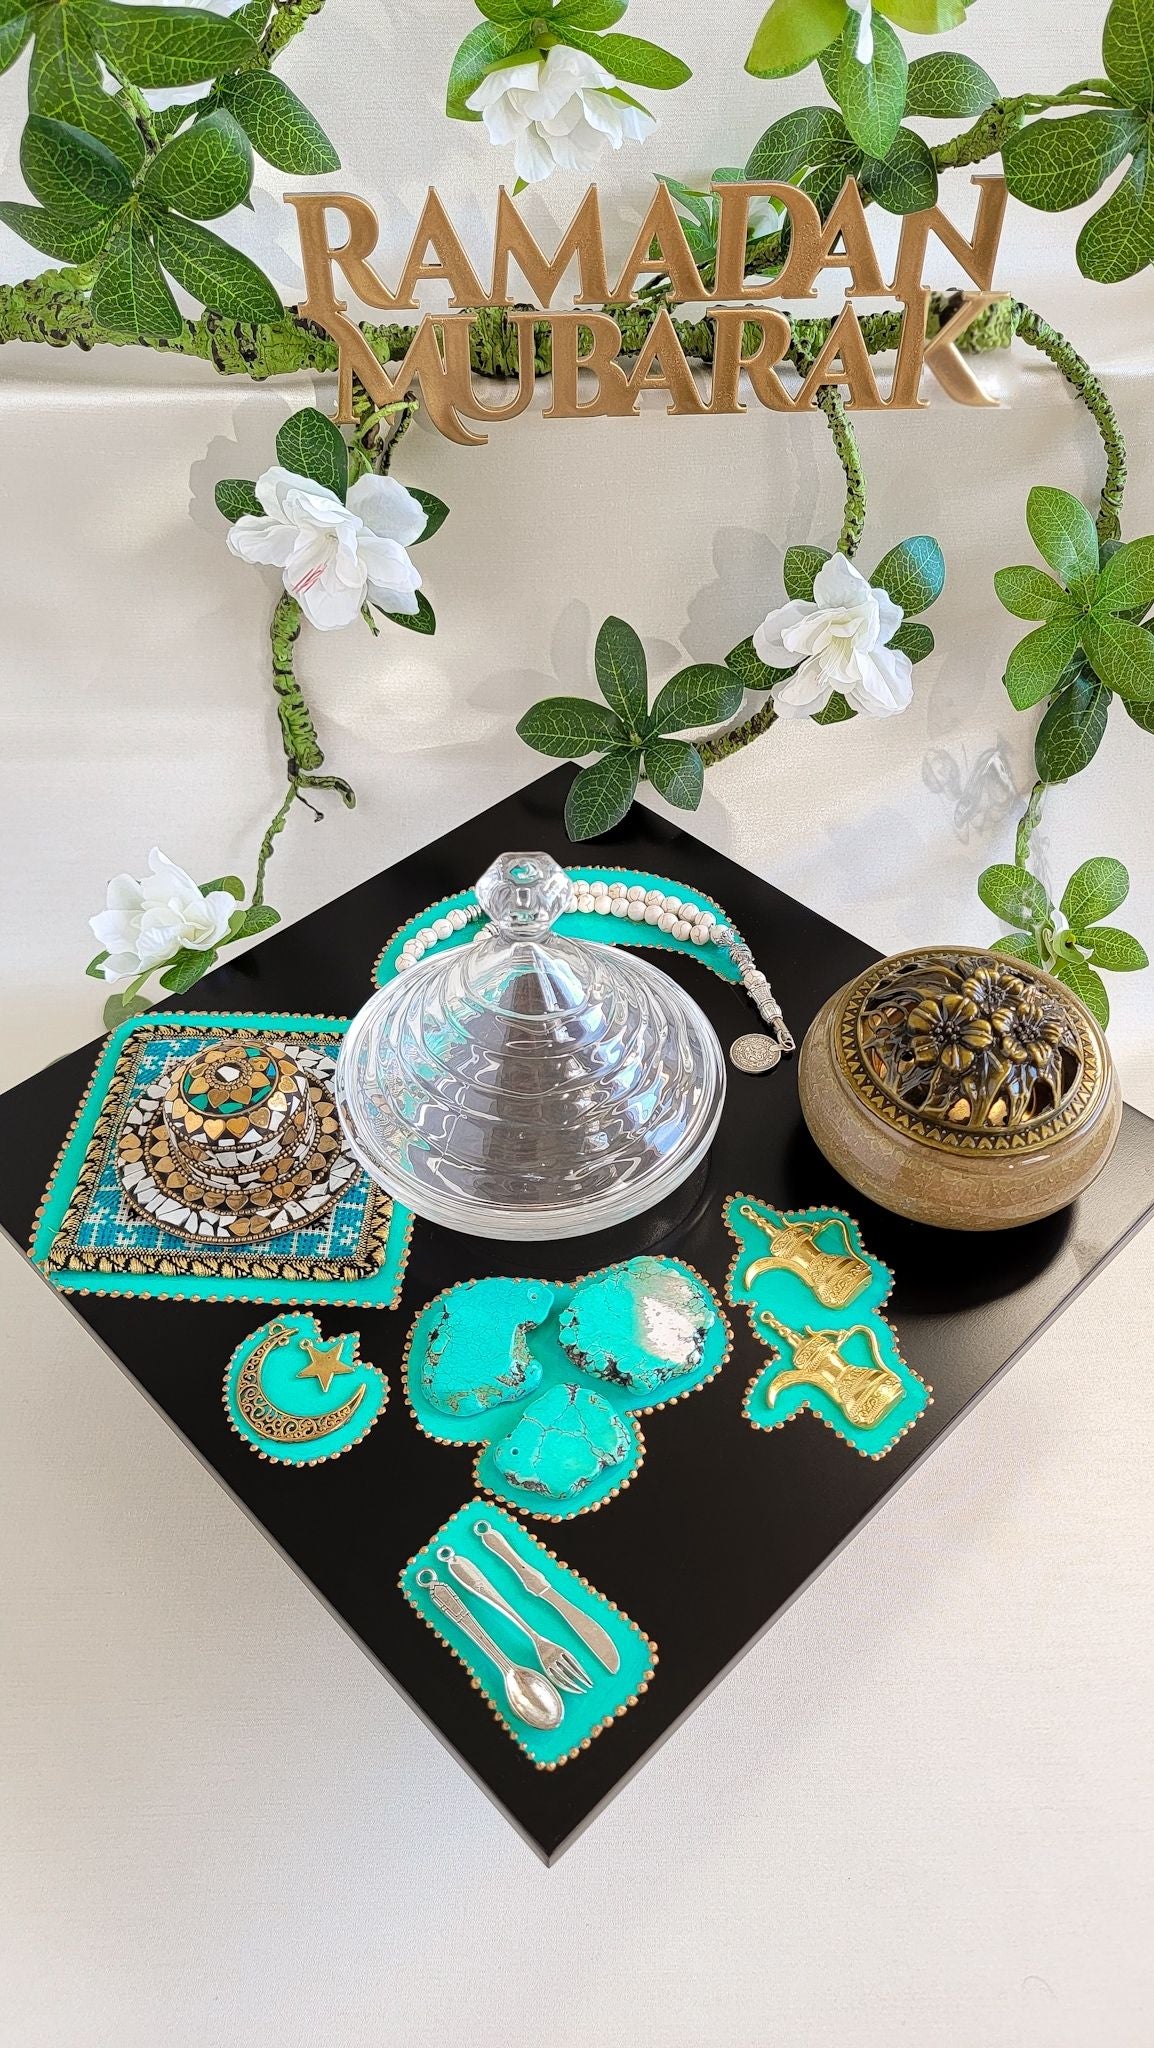 Square Wooden Eid & Ramadan Serving Tray with White Prayer Beads